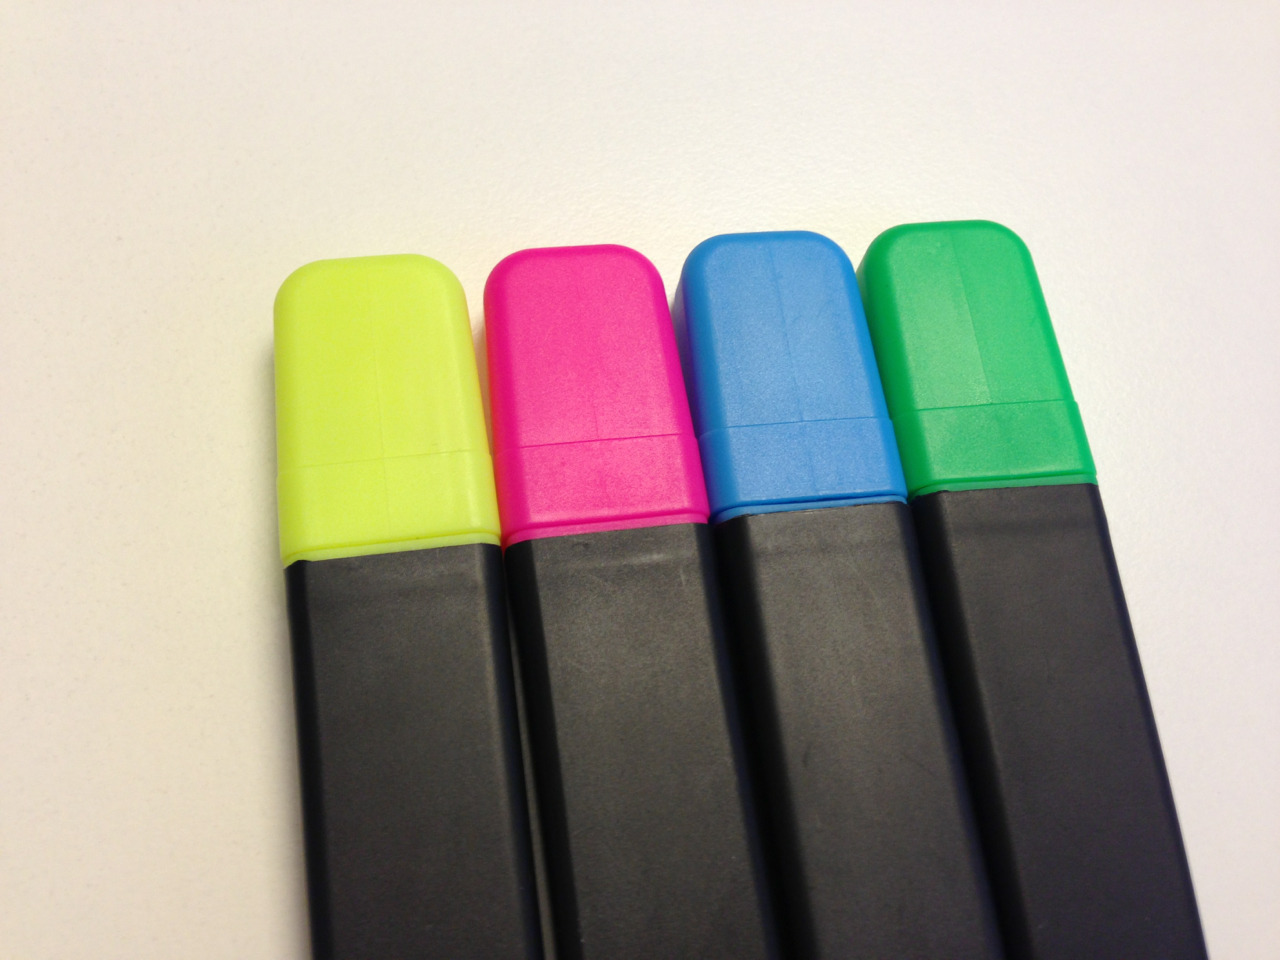 Highlight markers